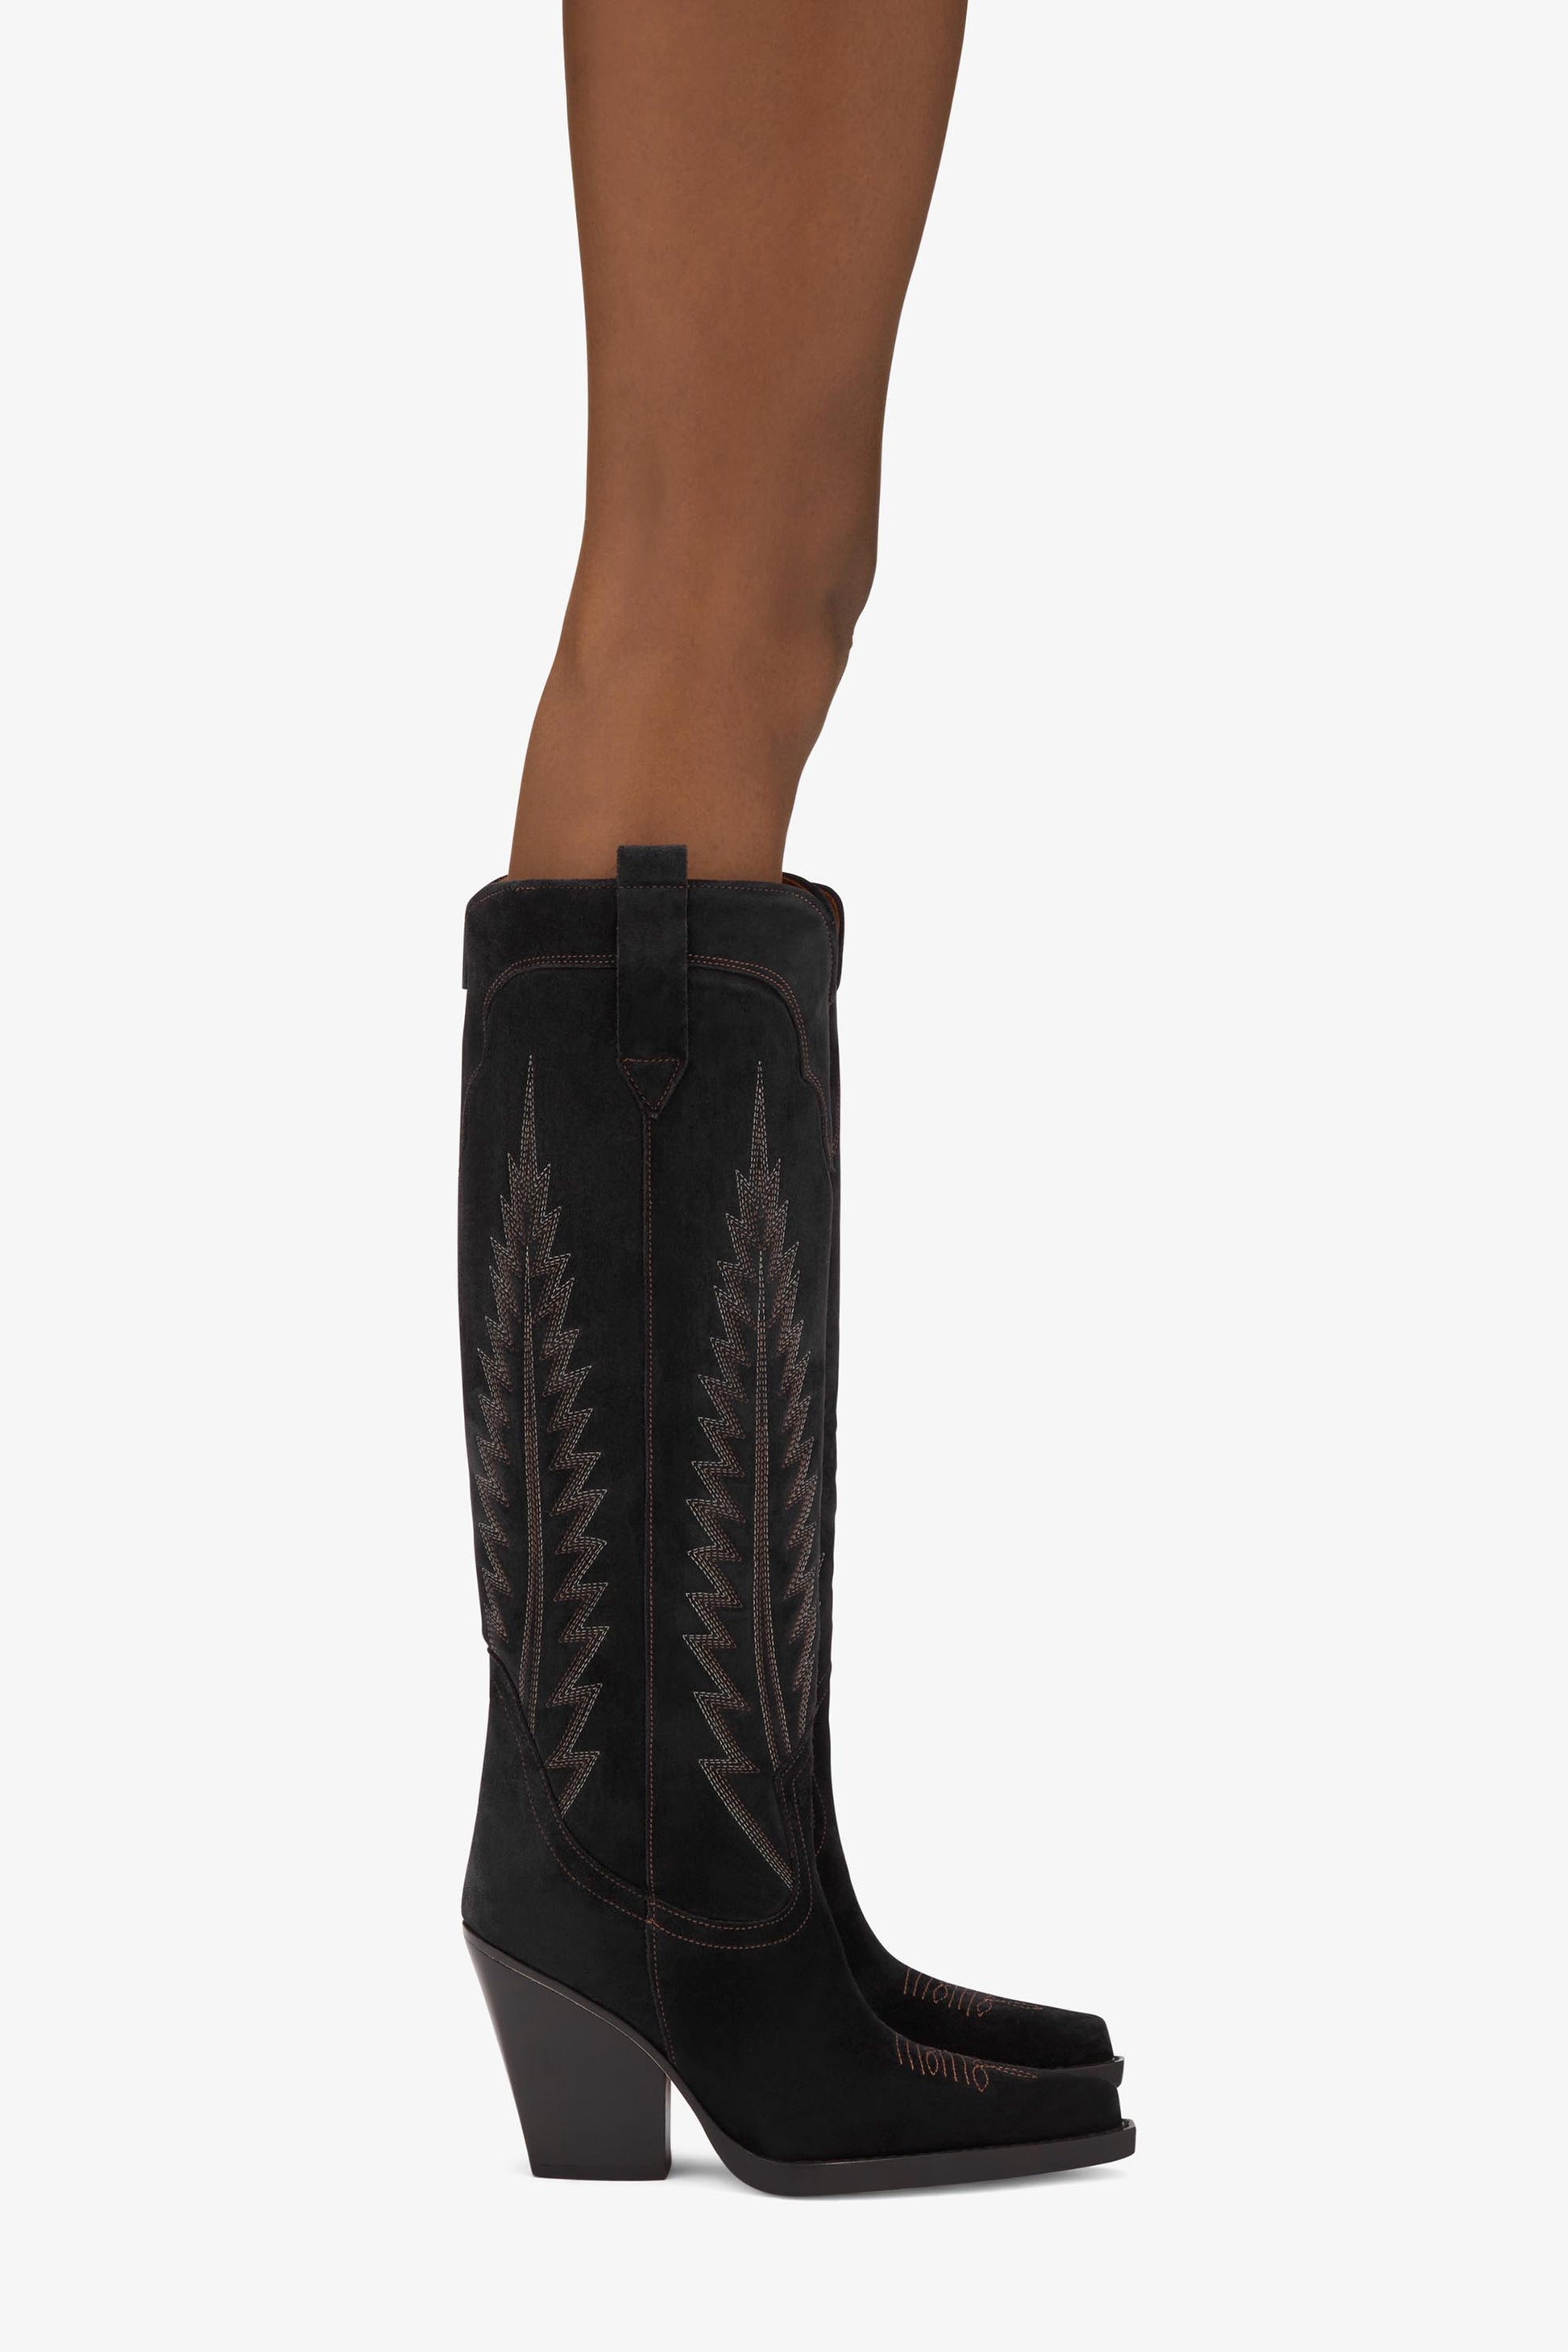 Black suede embroidered Texan boot - Product worn